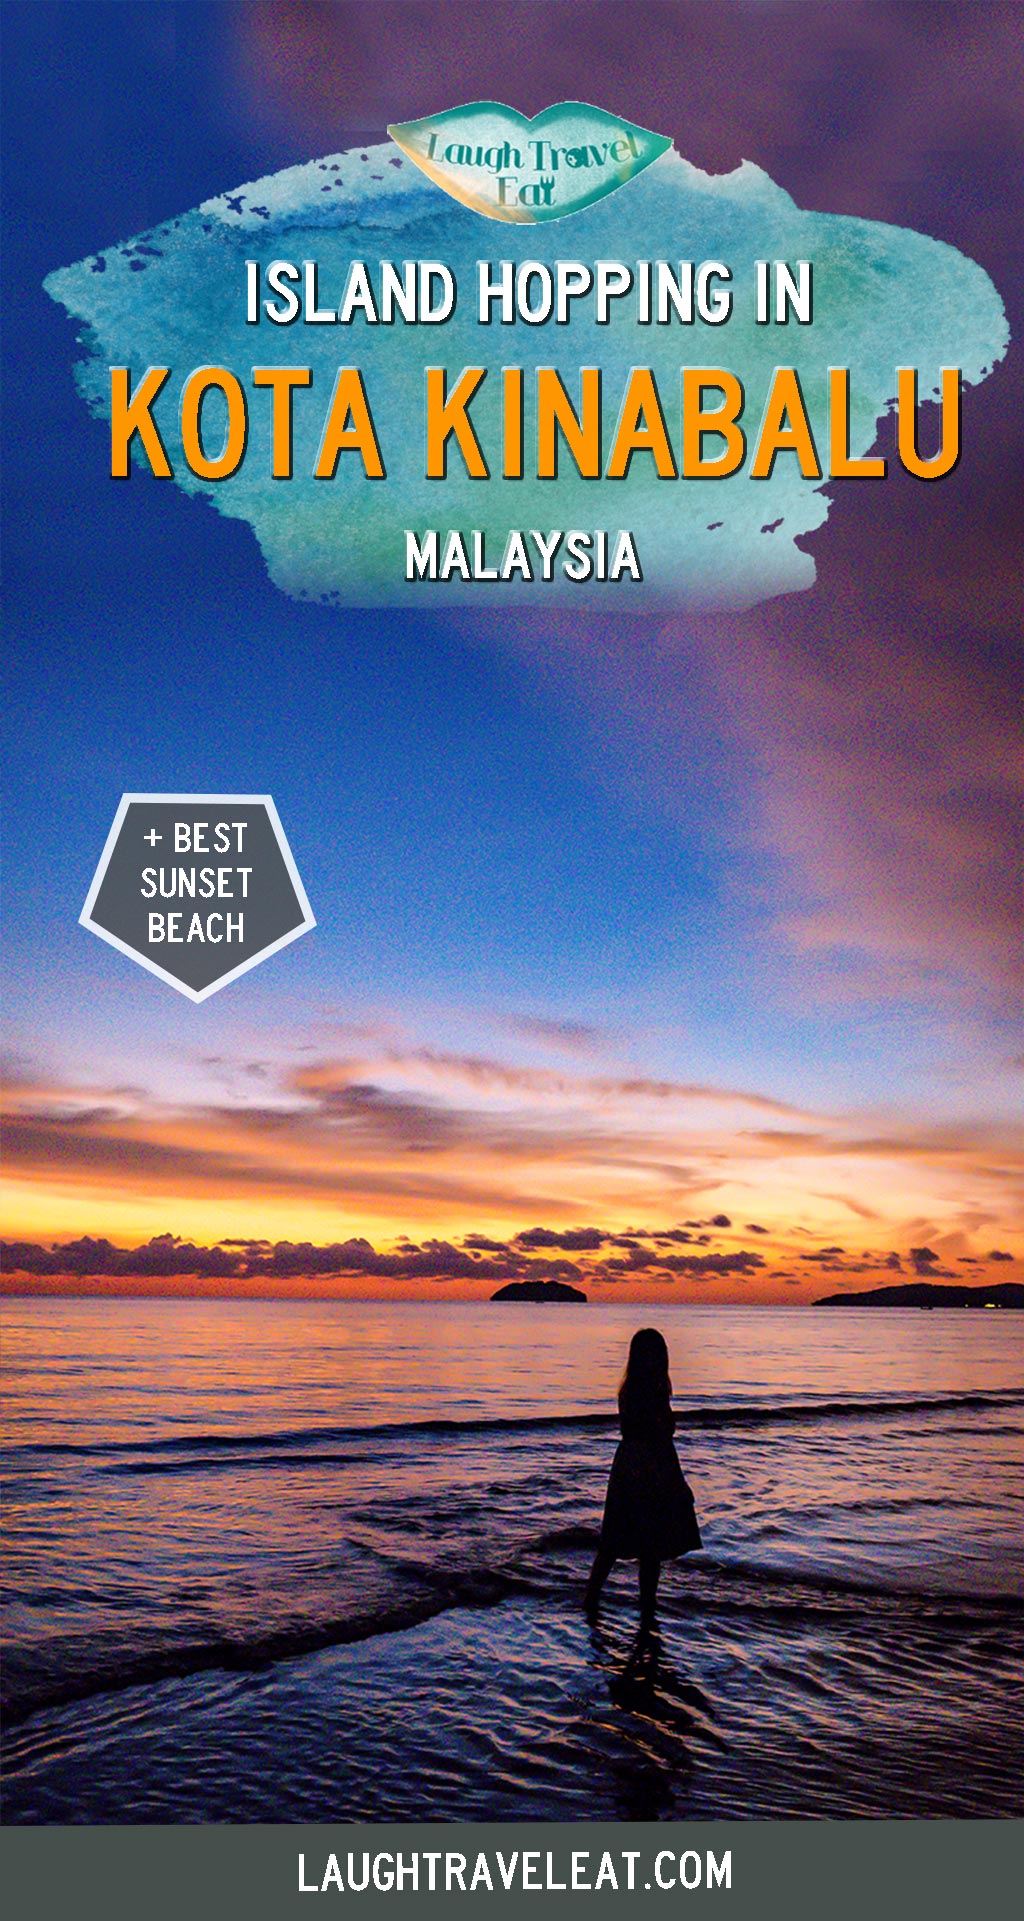 Kota Kinabalu is home to many beautiful islands and beaches, in particular those in Tunku Abdul Rahman National Park. Depending on whether you have enough time, here are the two main ways to enjoy the beaches in Kota Kinabalu: #KotaKinabalu #Sabah #Malaysia